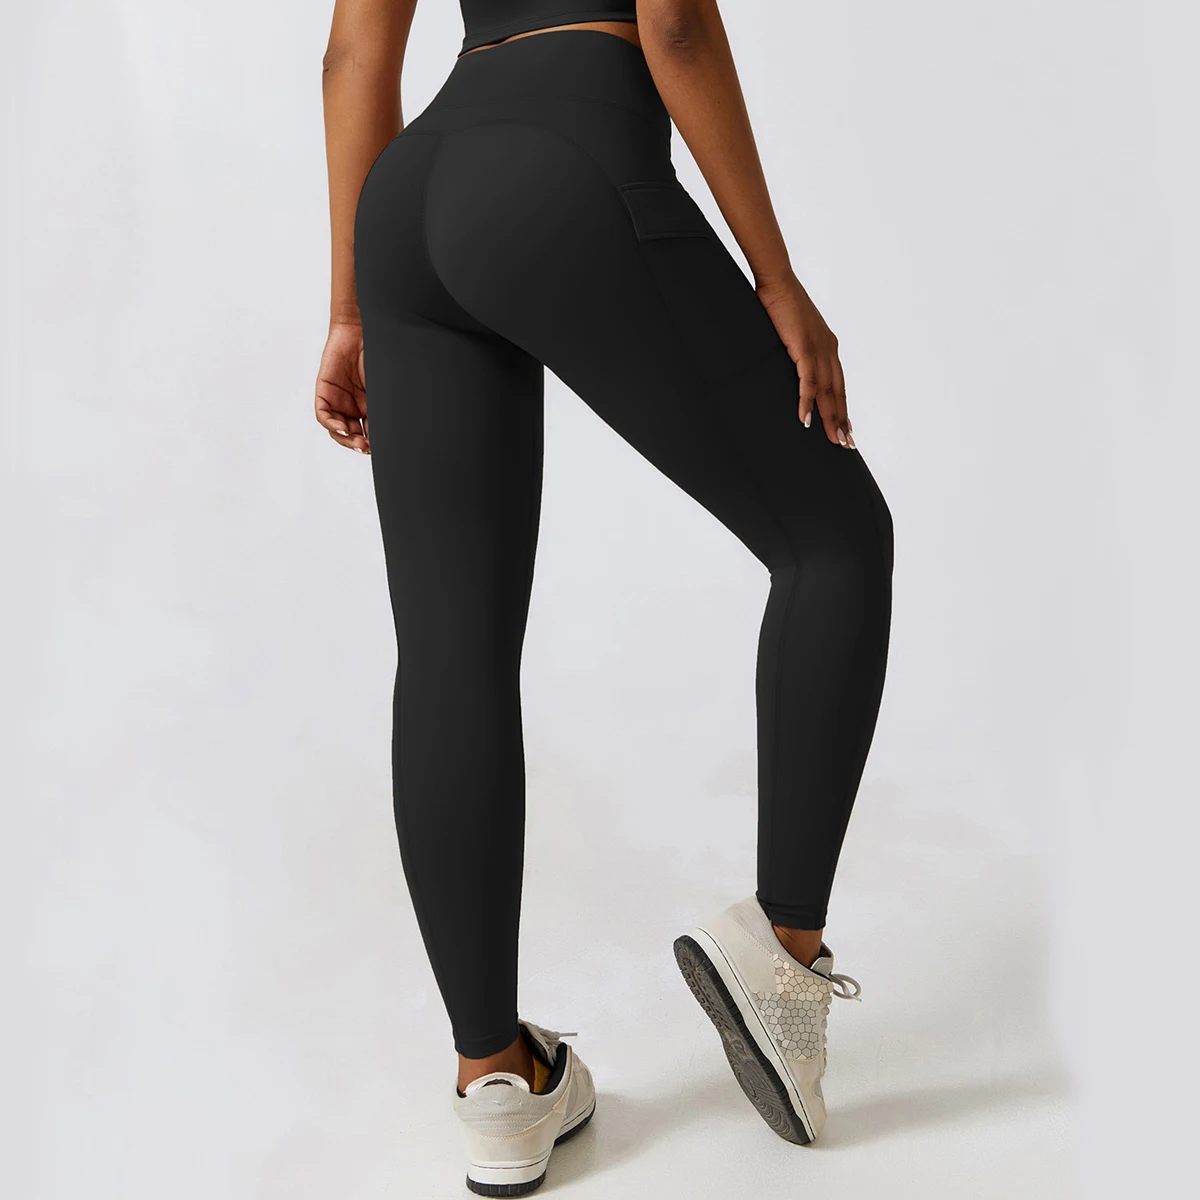 New Aloe Leggings with Pockets Outdoor Cycling Workout Pants Lifting Hips  Yoga Activewear Ropa Deportiva Mujer Gym CCK8296 - AliExpress